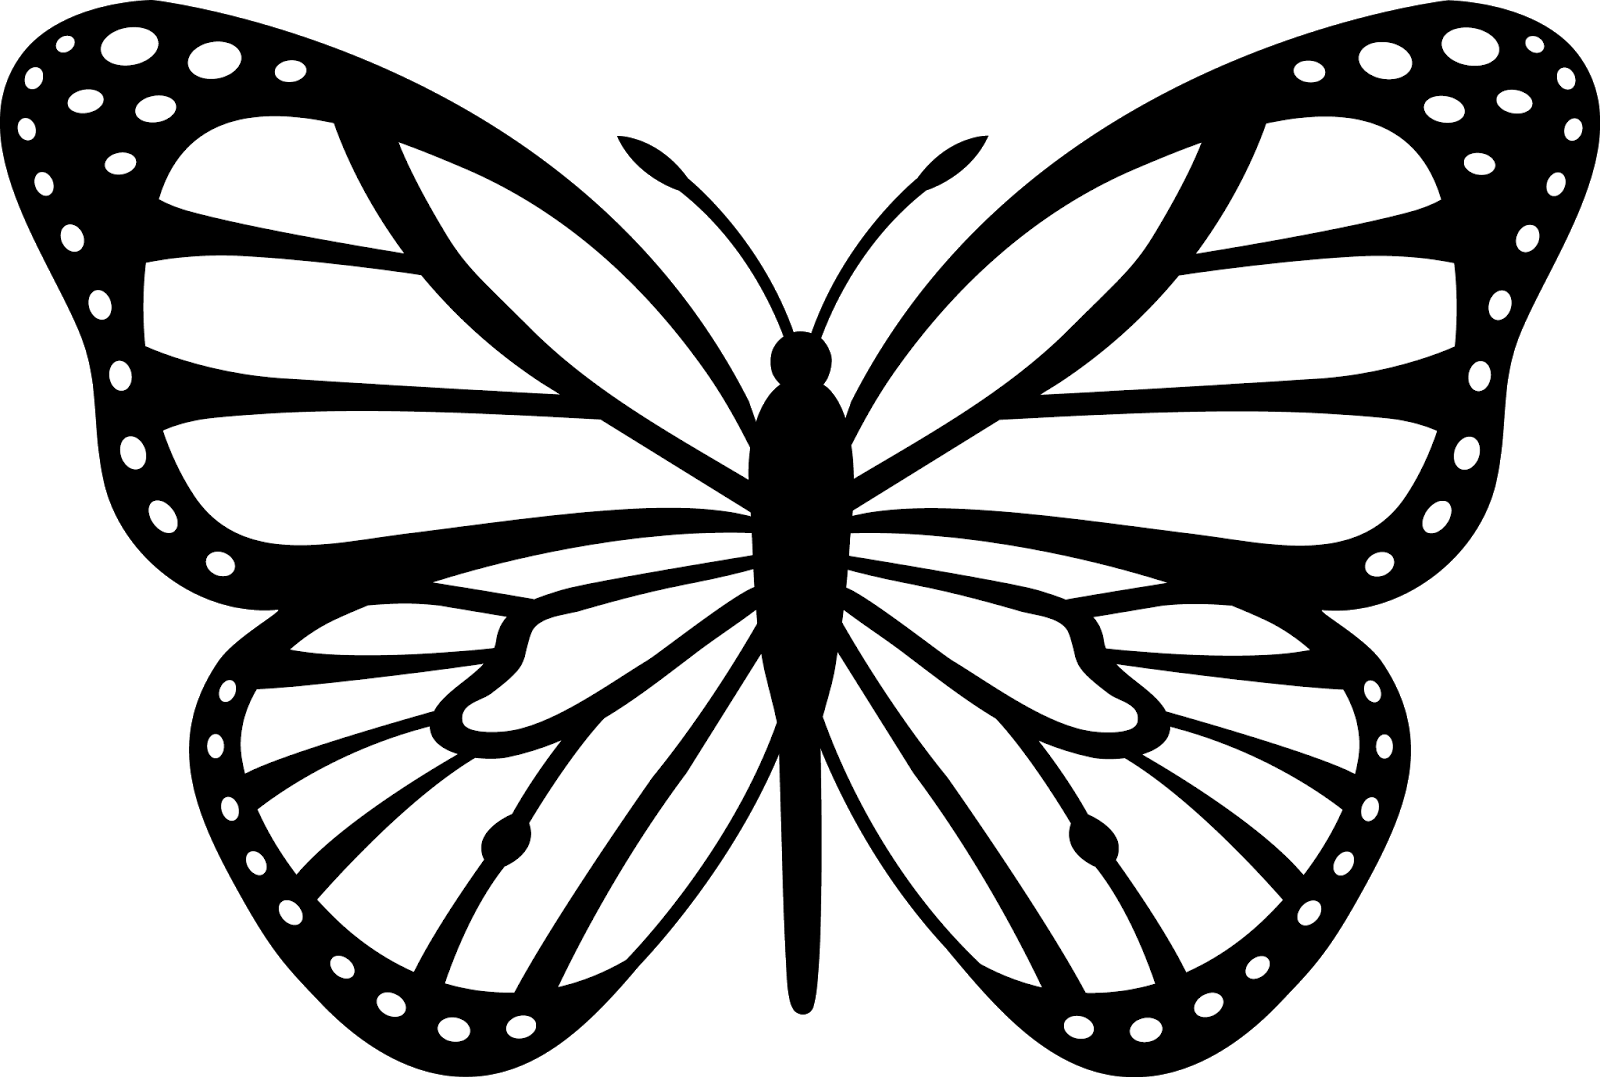 News Butterfly: Butterfly Cartoon Black And White